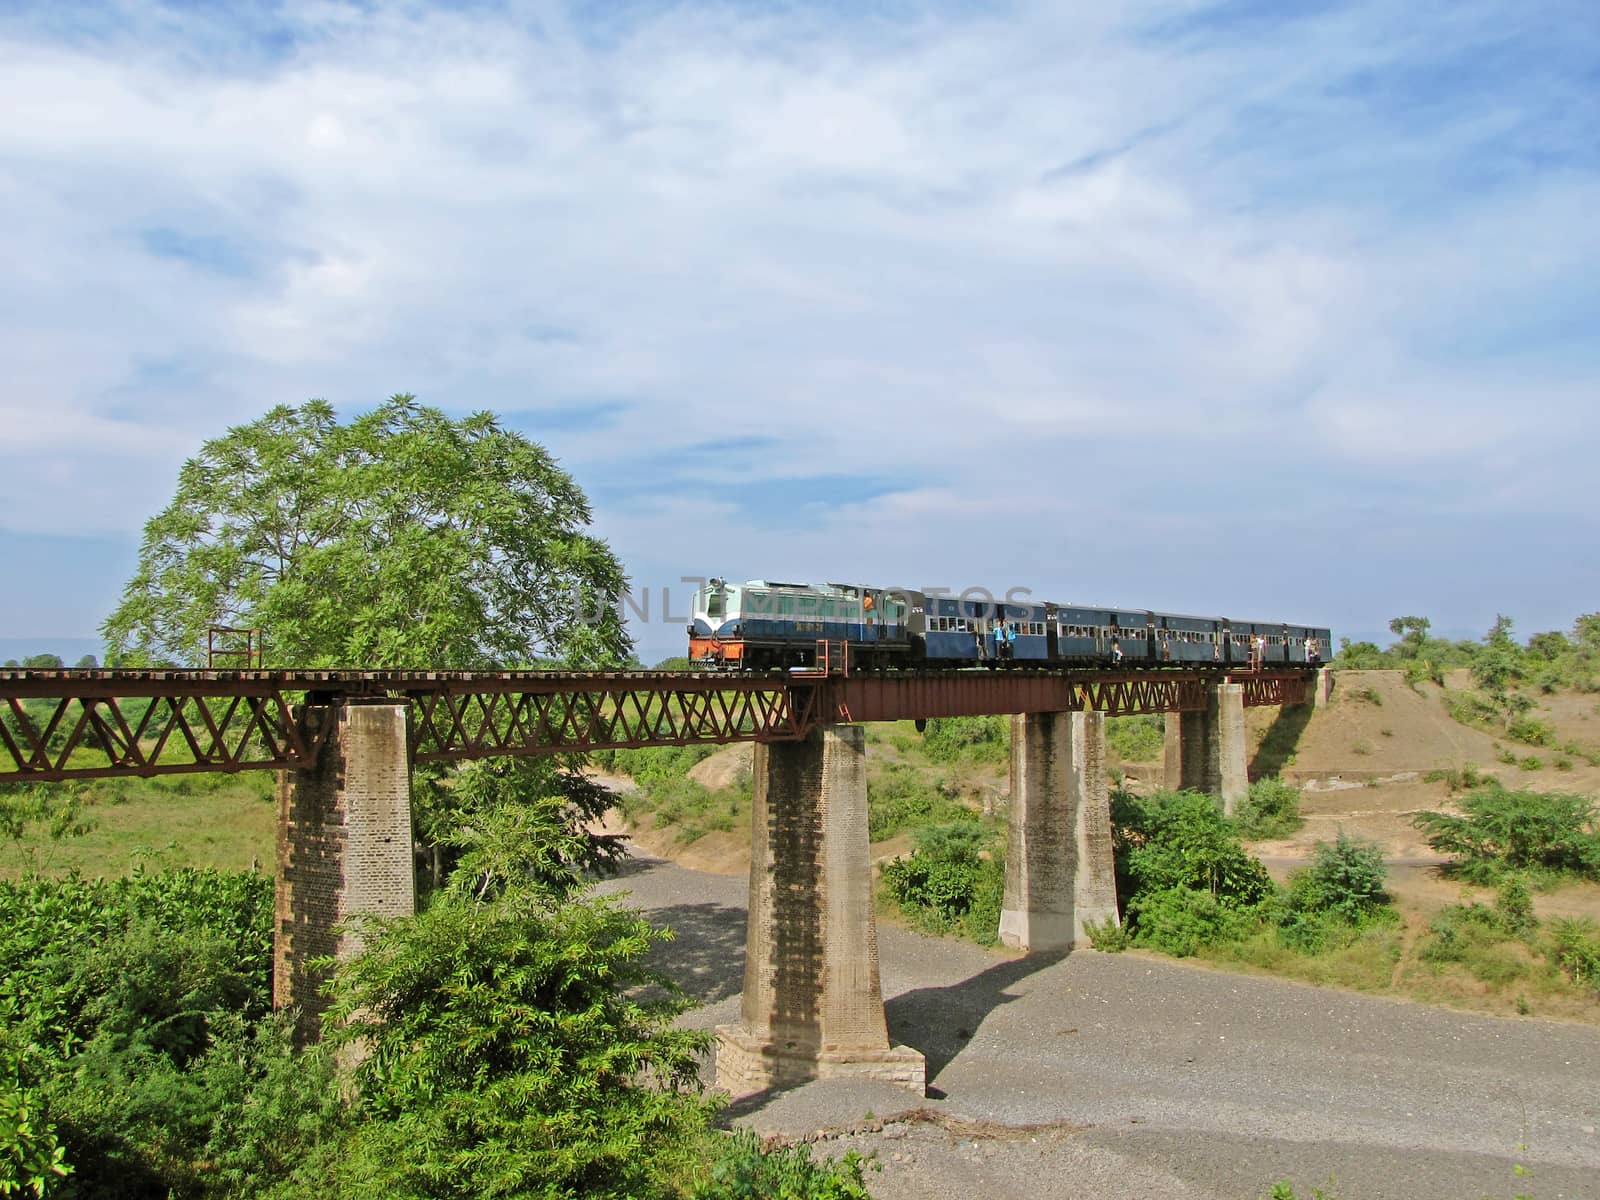 A small  narrow gauge train with diesel locomotive crossing an old stone and iron  bridge in Chamak, Maharashtra, India. by lalam